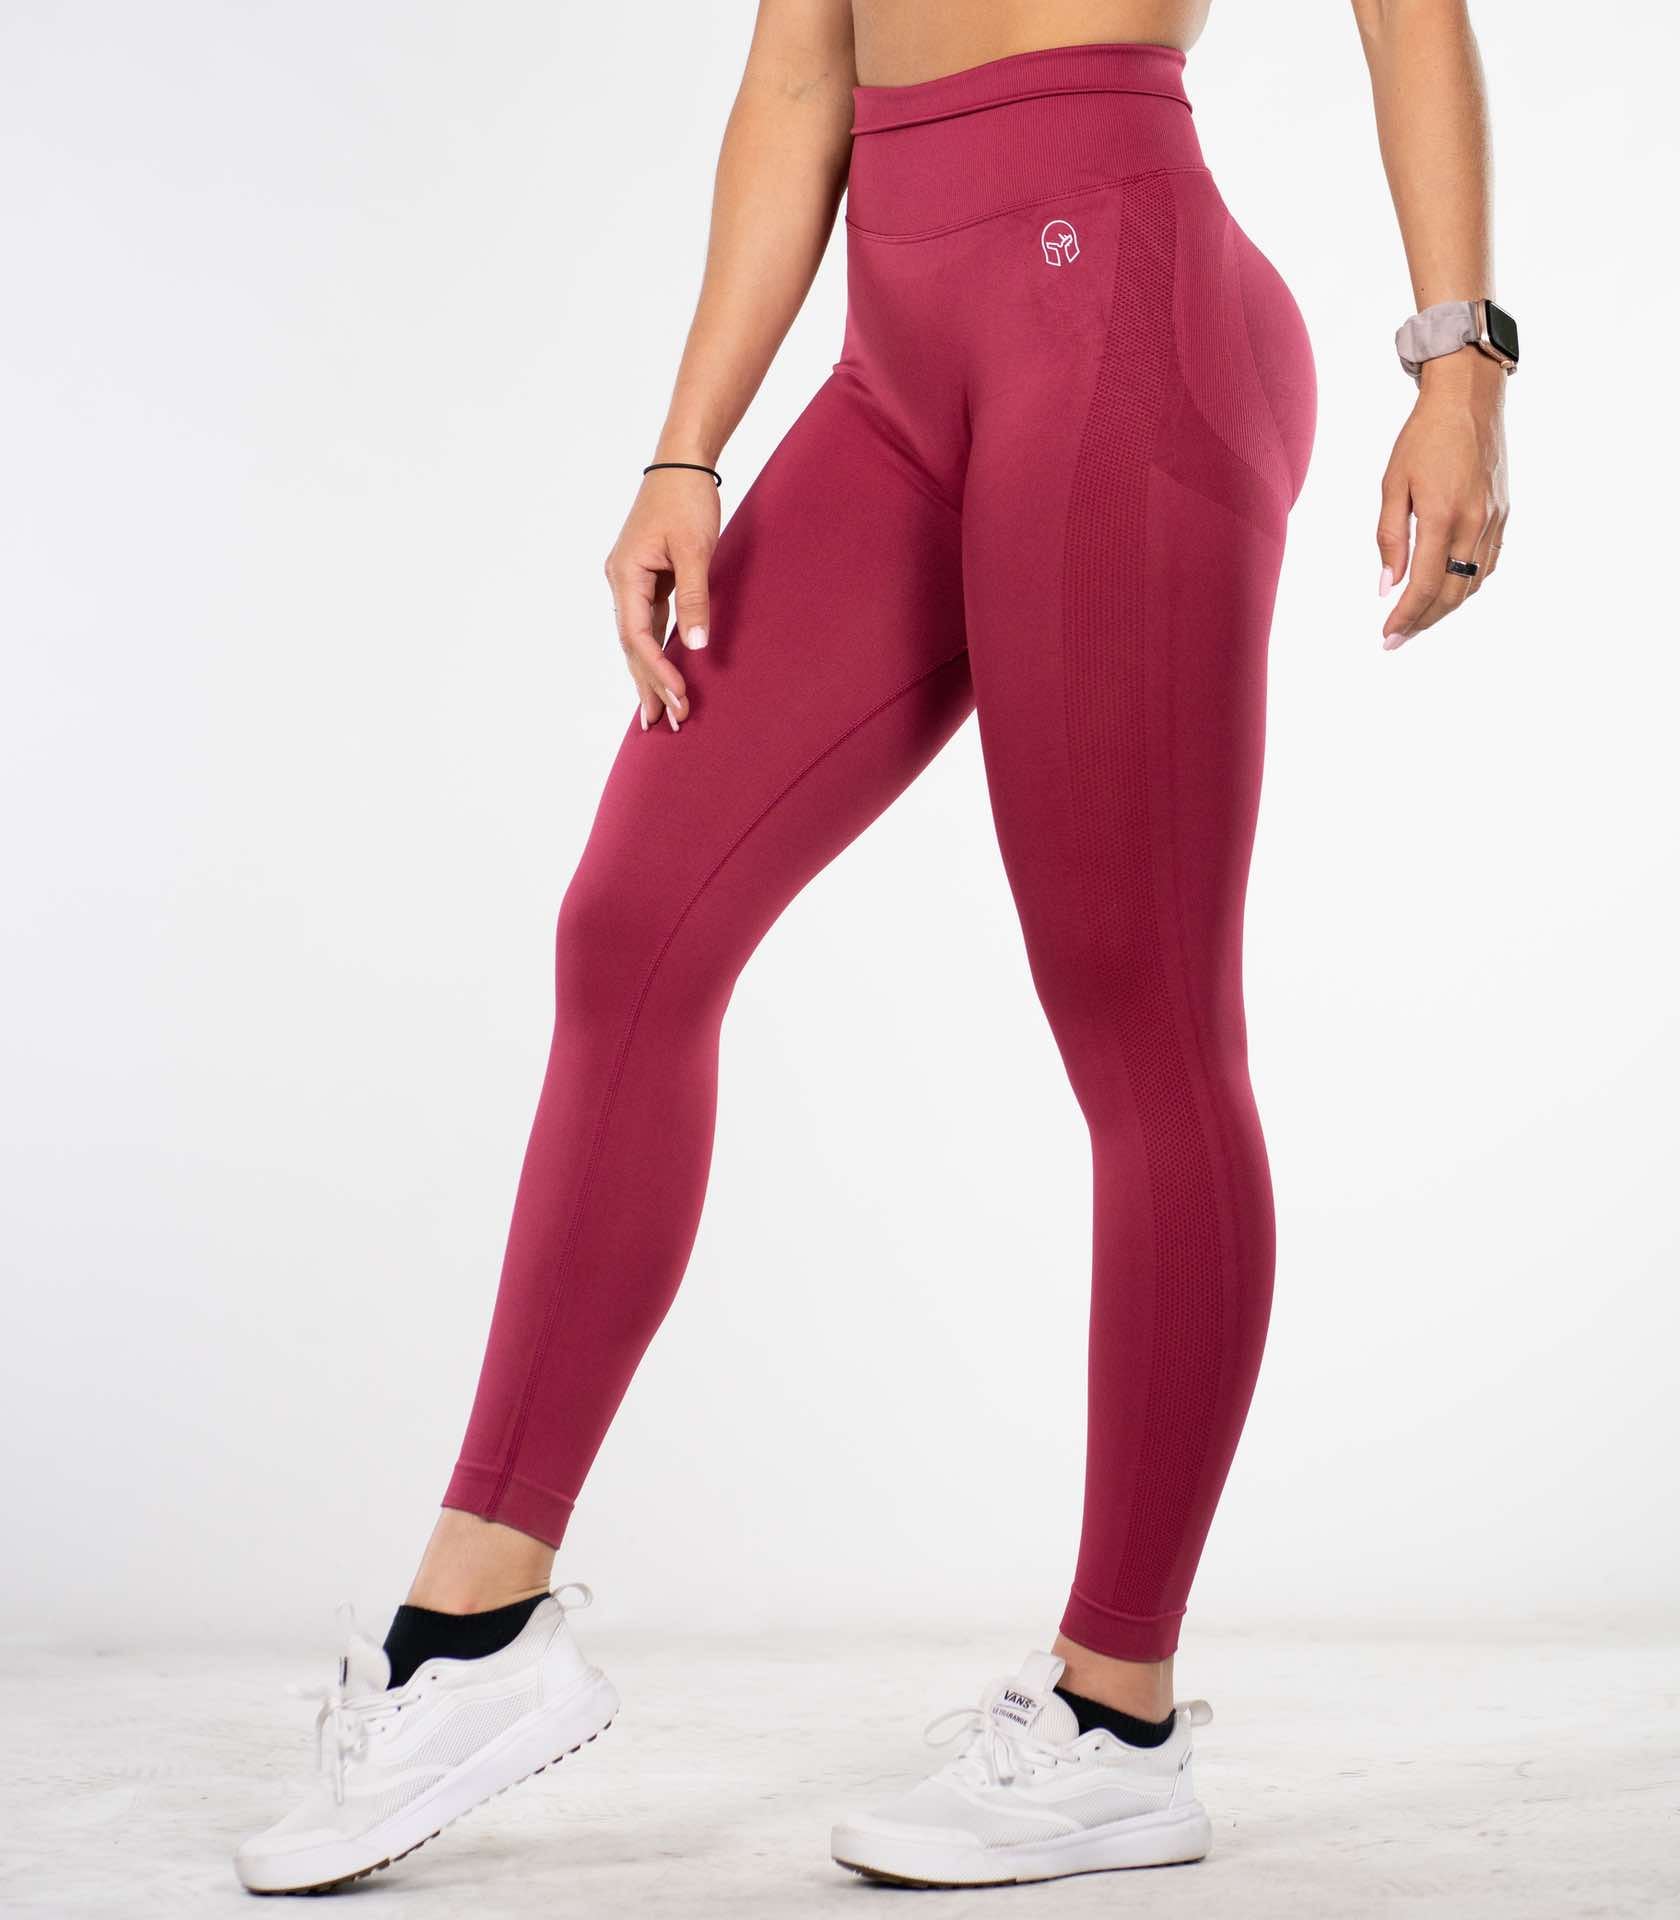 Titan - Crossover leggings with pockets - Titan Bags